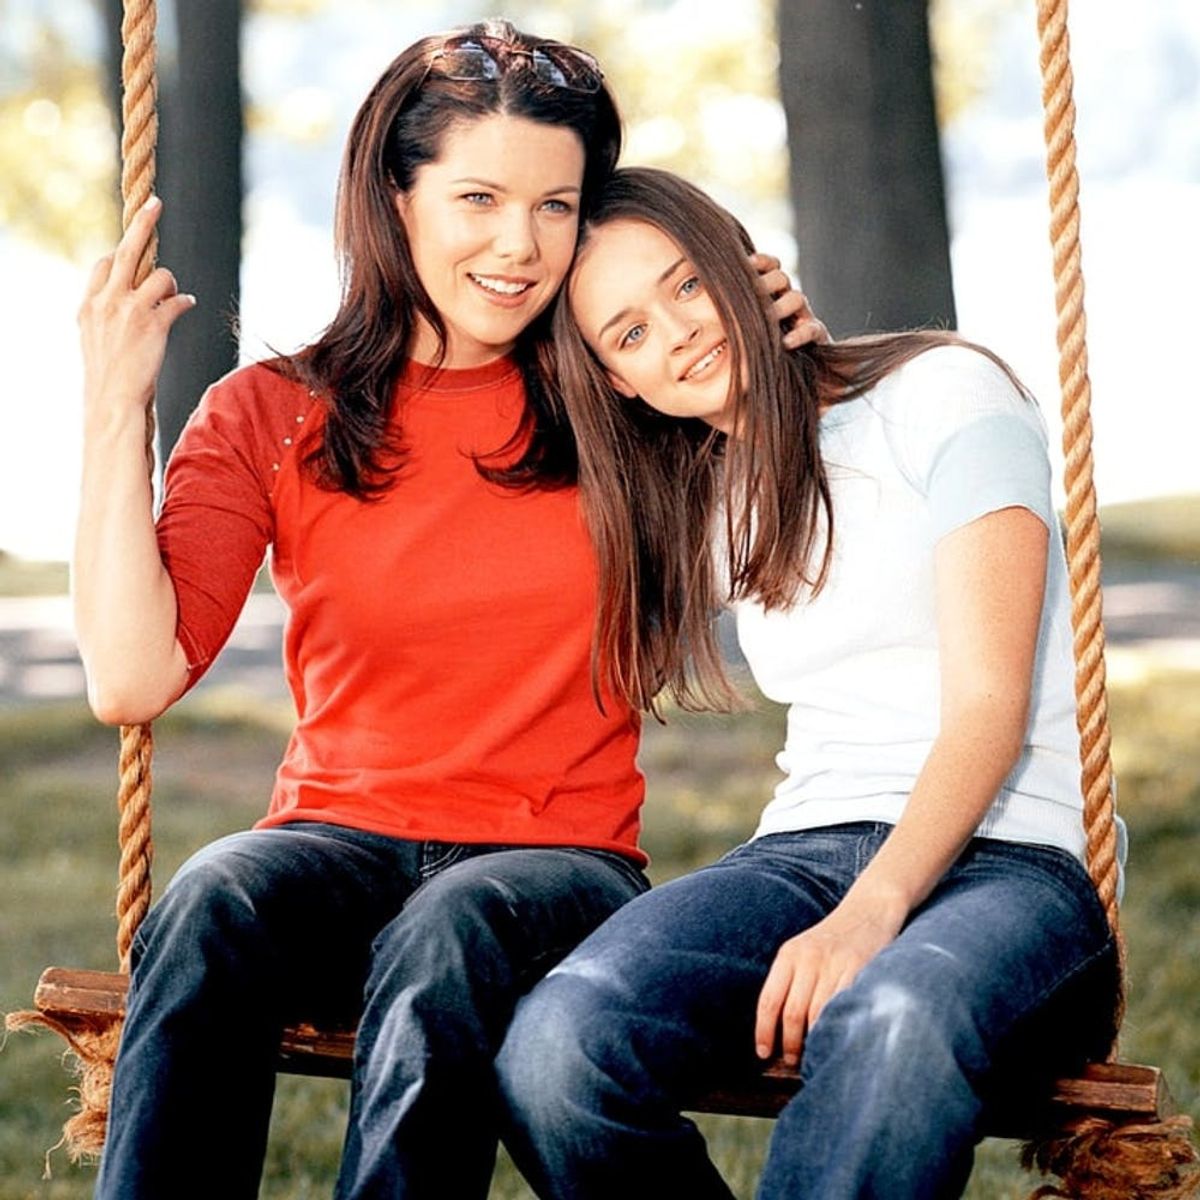 Fans Were Given an Exclusive Gilmore Girls Sneak Peek and We Have the Deets